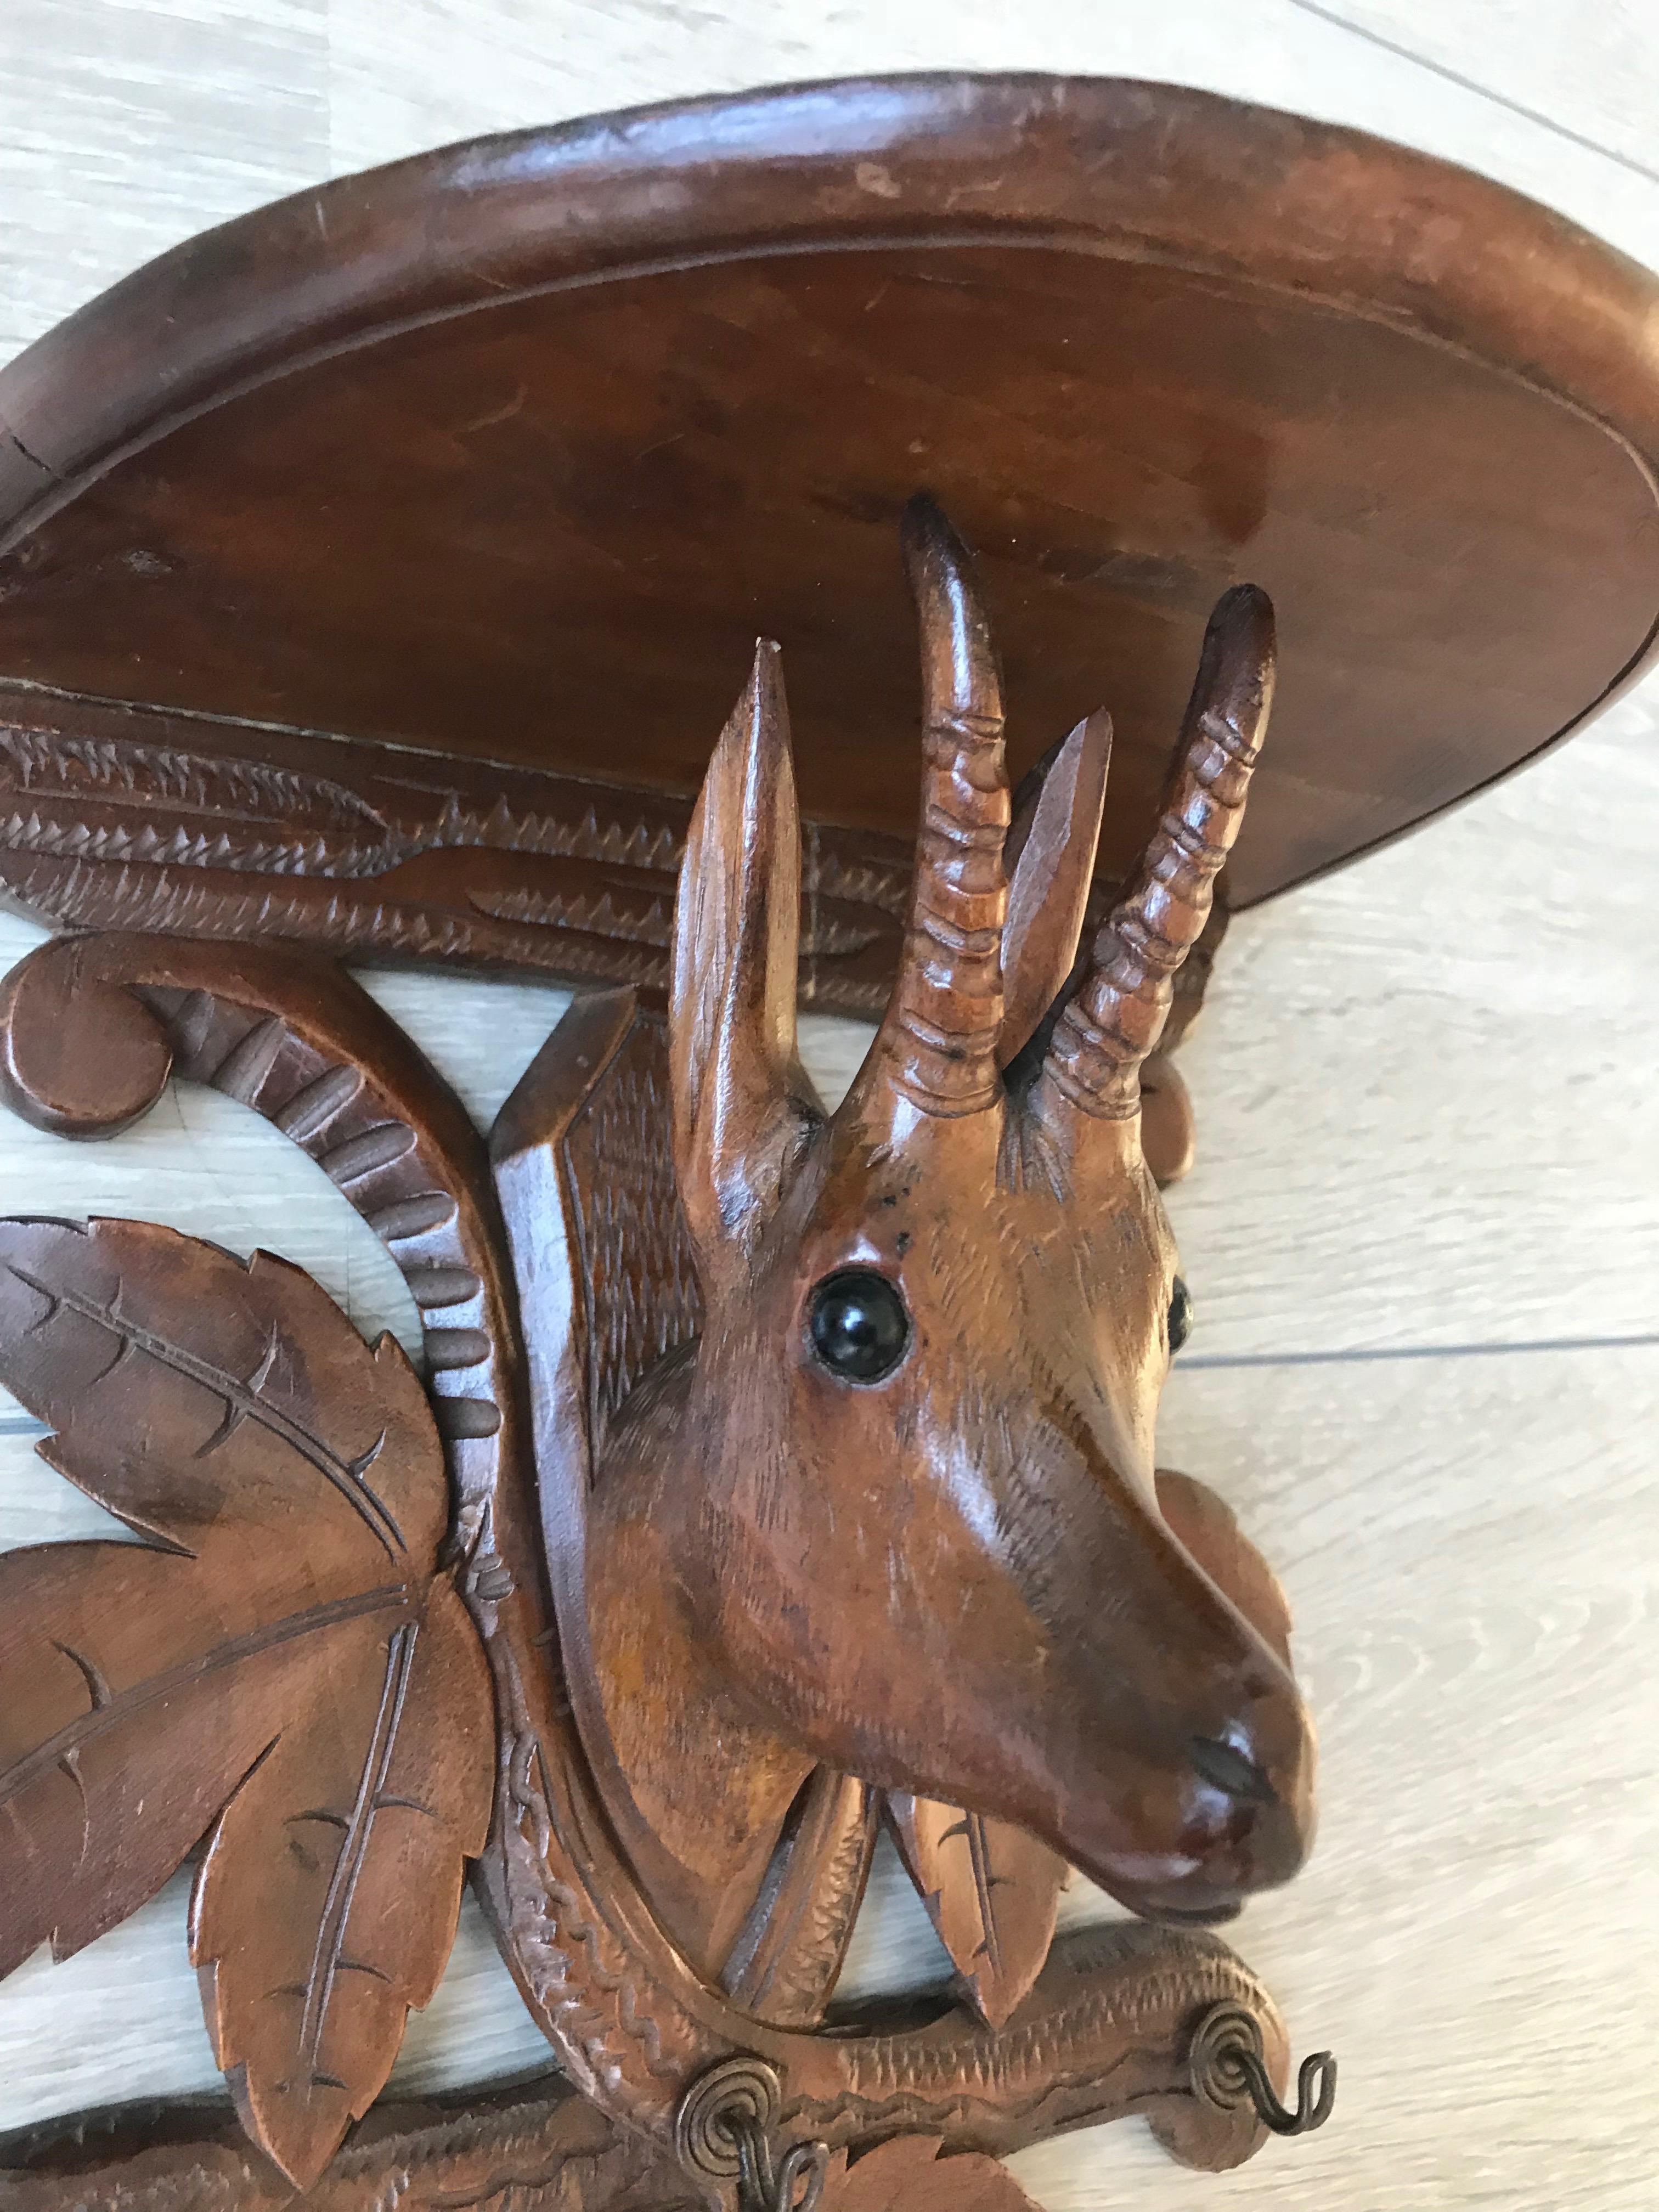 Rare and highly decorative Black Forest wall bracket. 

This quality carved Black Forest wall rack is another one of our recent great finds. The details in the stunning chamois head and the overall look and feel of this handcrafted antique reveals